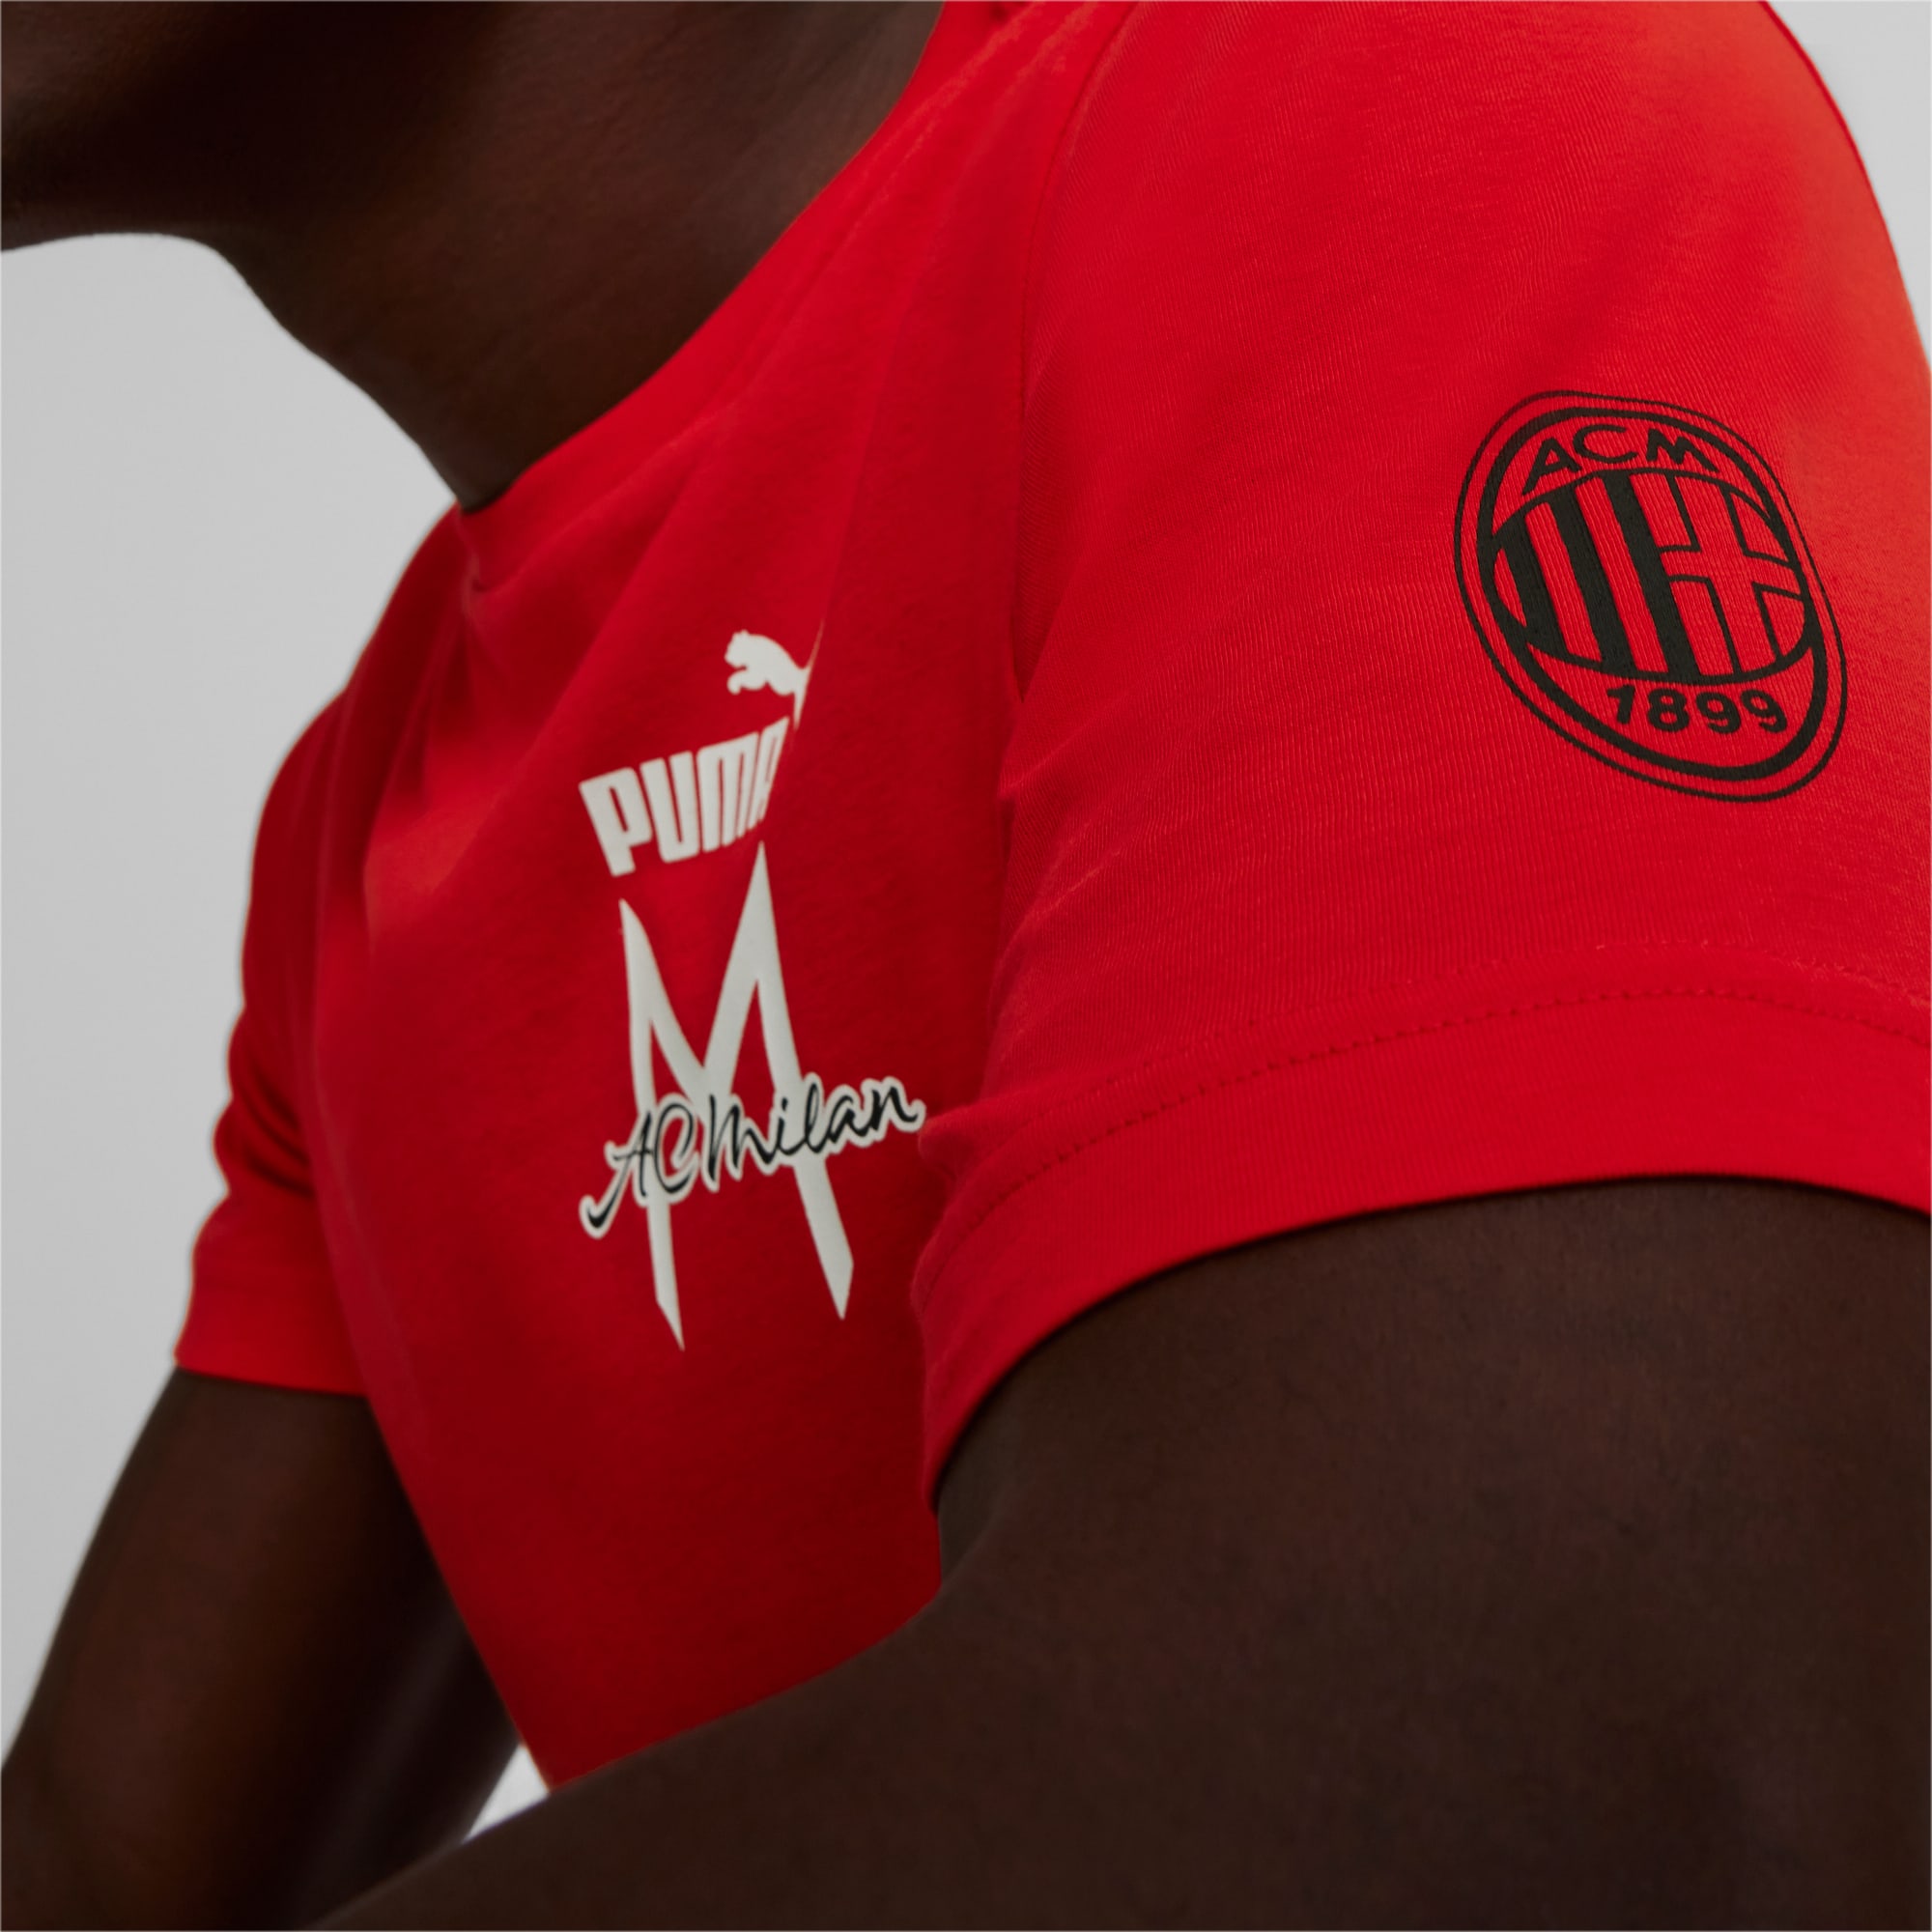 Men's PUMA AC Milan Ftblicons T-Shirt, Red, Size S, Clothing